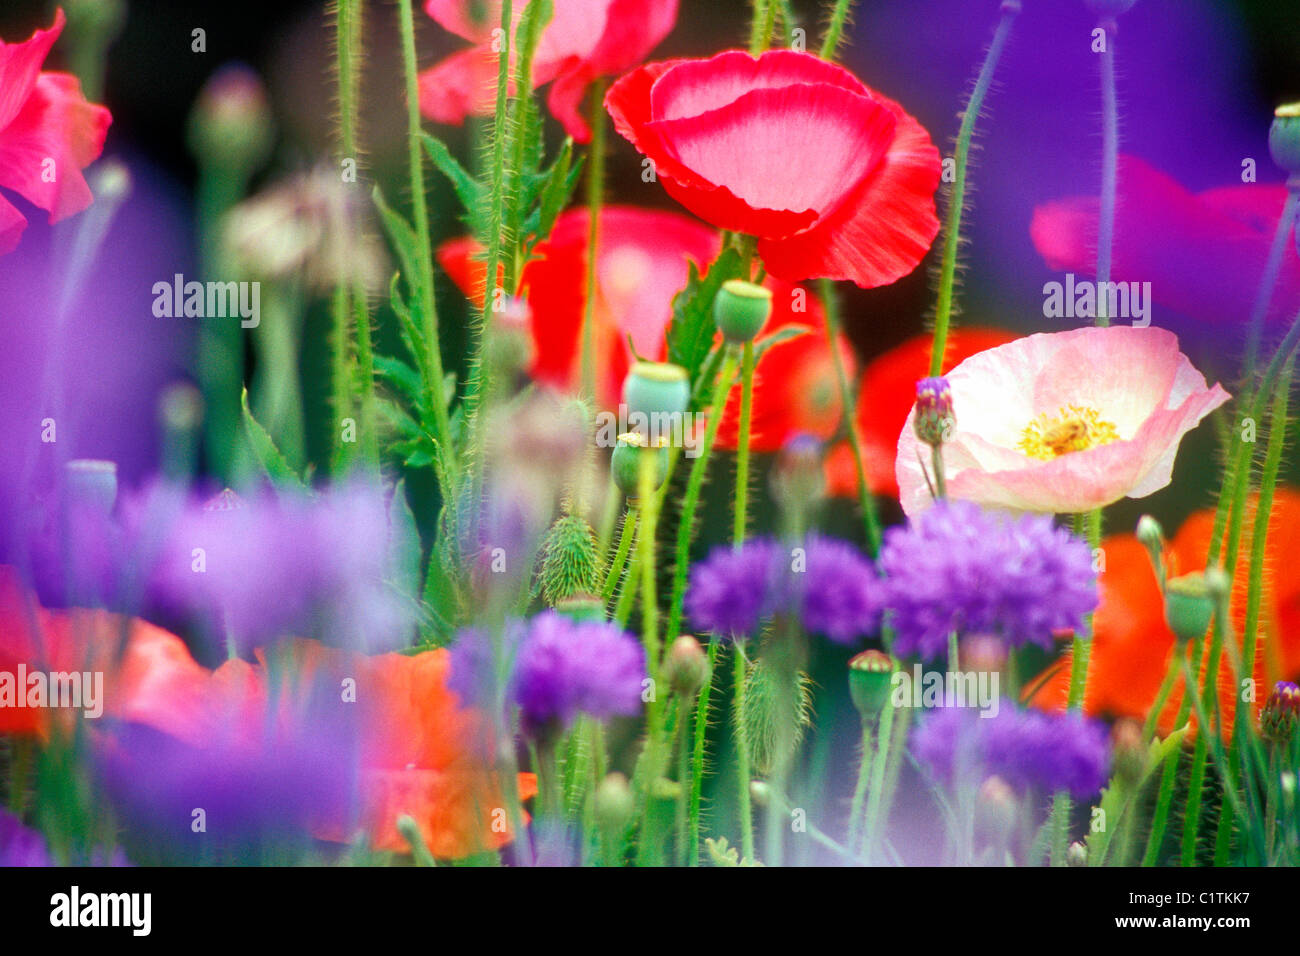 Close-up of poppies and Bachelor Buttons Stock Photo